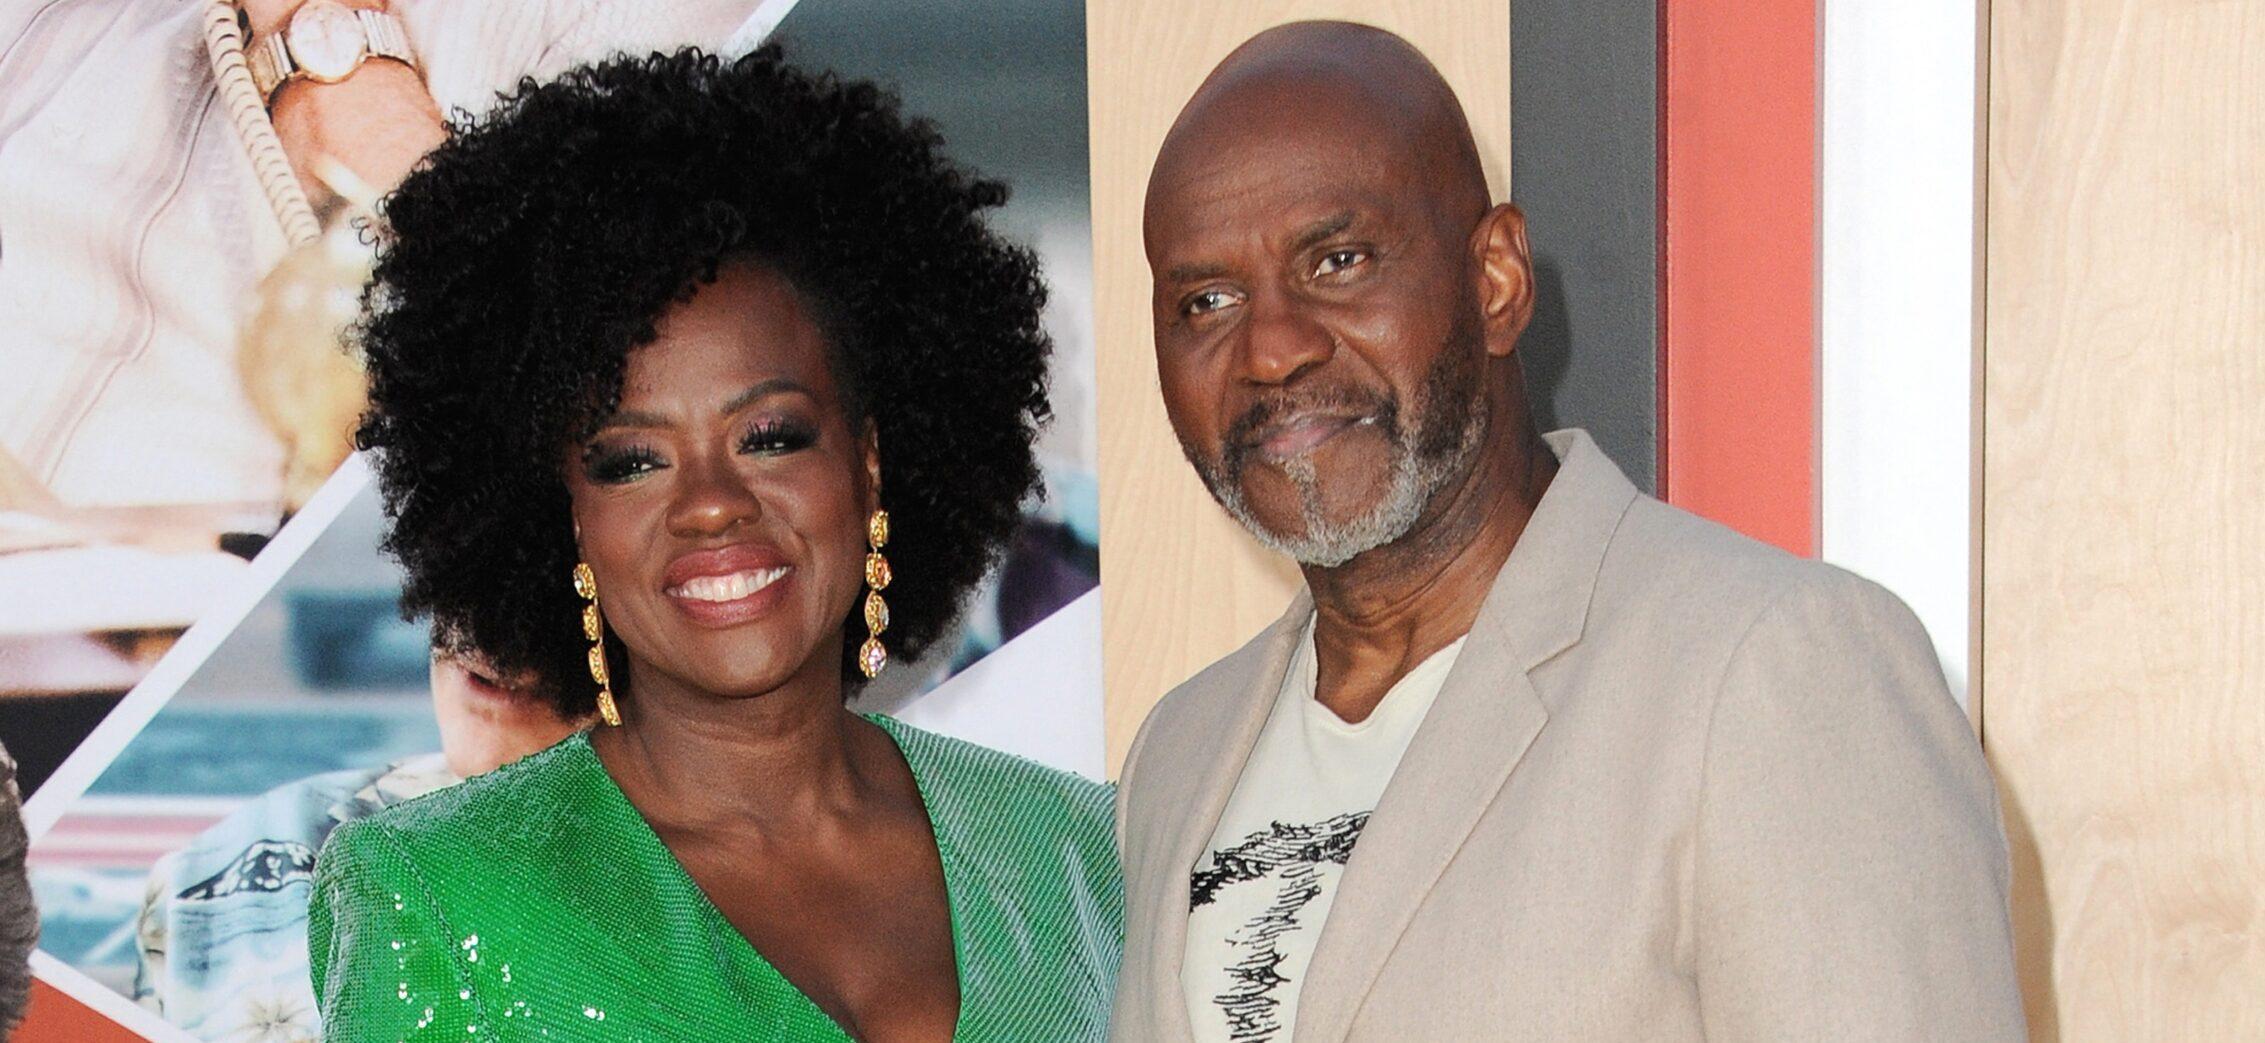 Viola Davis Marks ’20 Years Of Connection’ With Husband In Sweet Anniversary Post